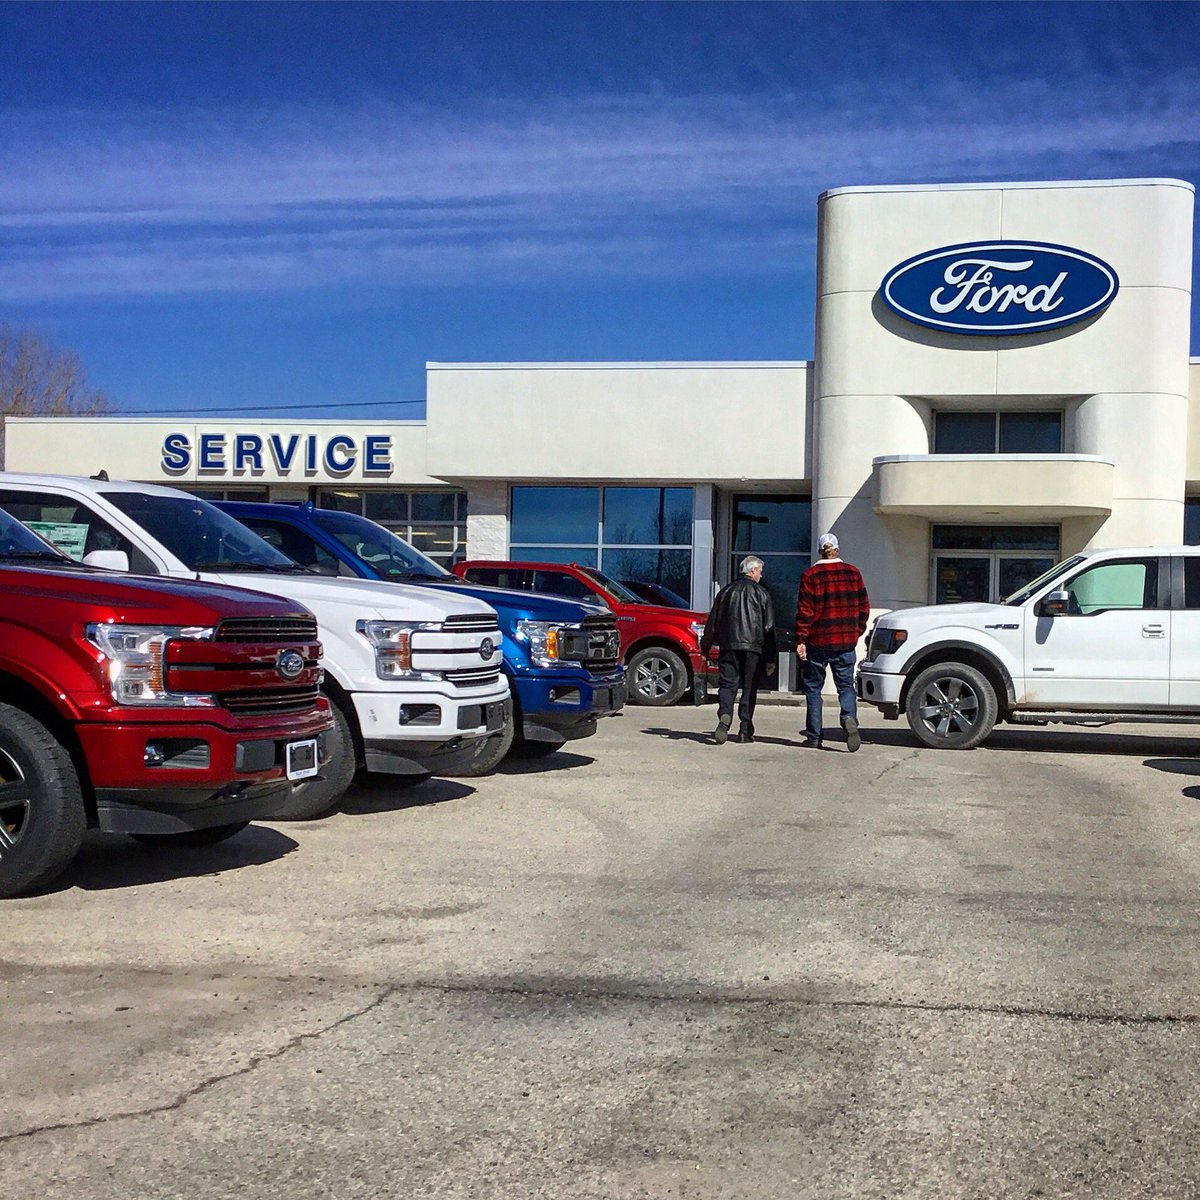 Ron and the rest of the staff are all about bringing our customers the best service. 
As you can see, Ron is too busy to ham it up for the camera. 
#wemakeeverythingeasy #ford #forddealer #forddealership #carsales #trucksales @ford @FordCanada